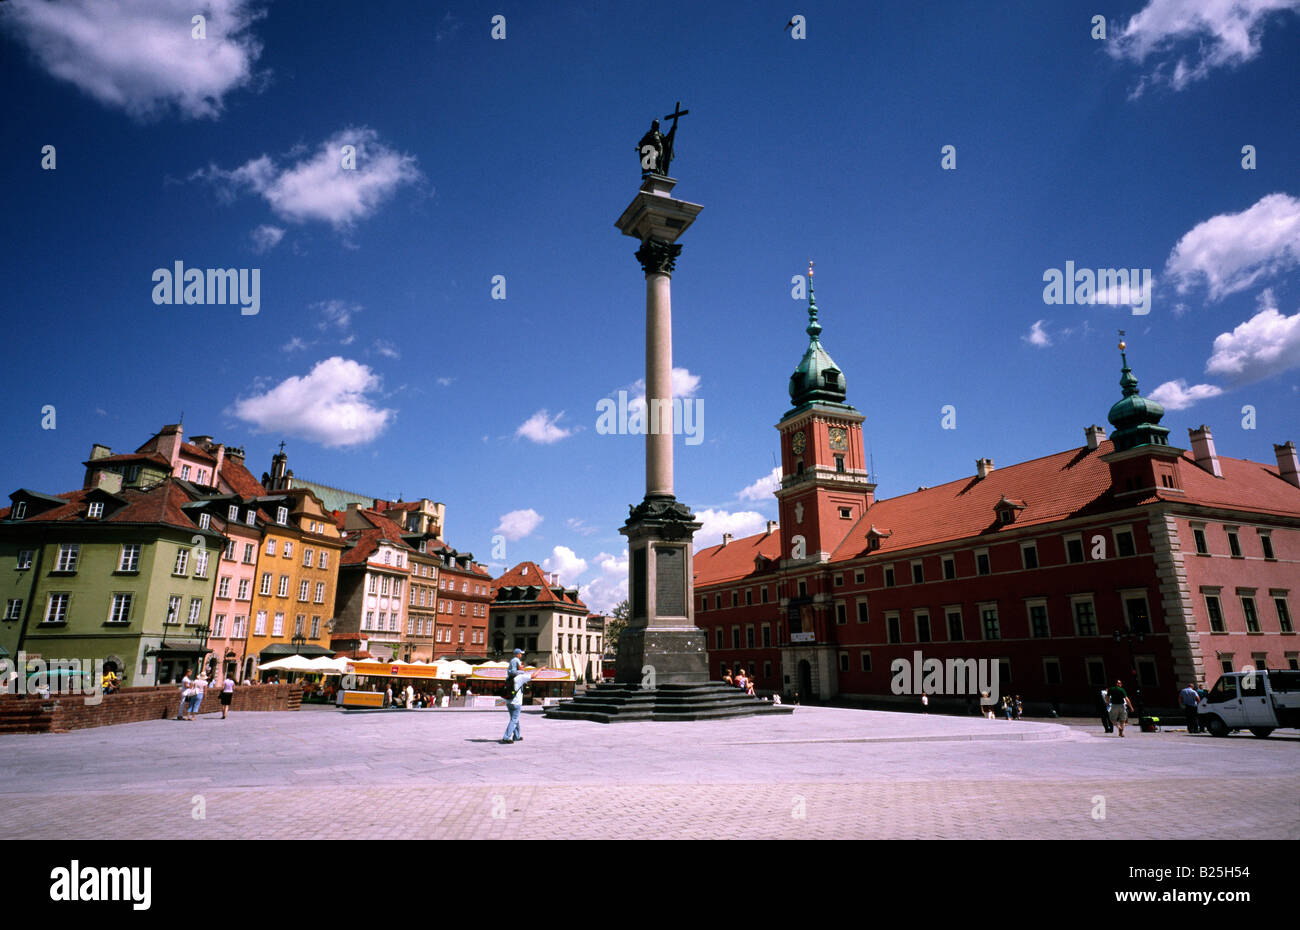 July 8, 2008 - Zygmunt's column and Royal Castle in the Stare Miasto, the Old Town of the Polish capital of Warsaw. Stock Photo